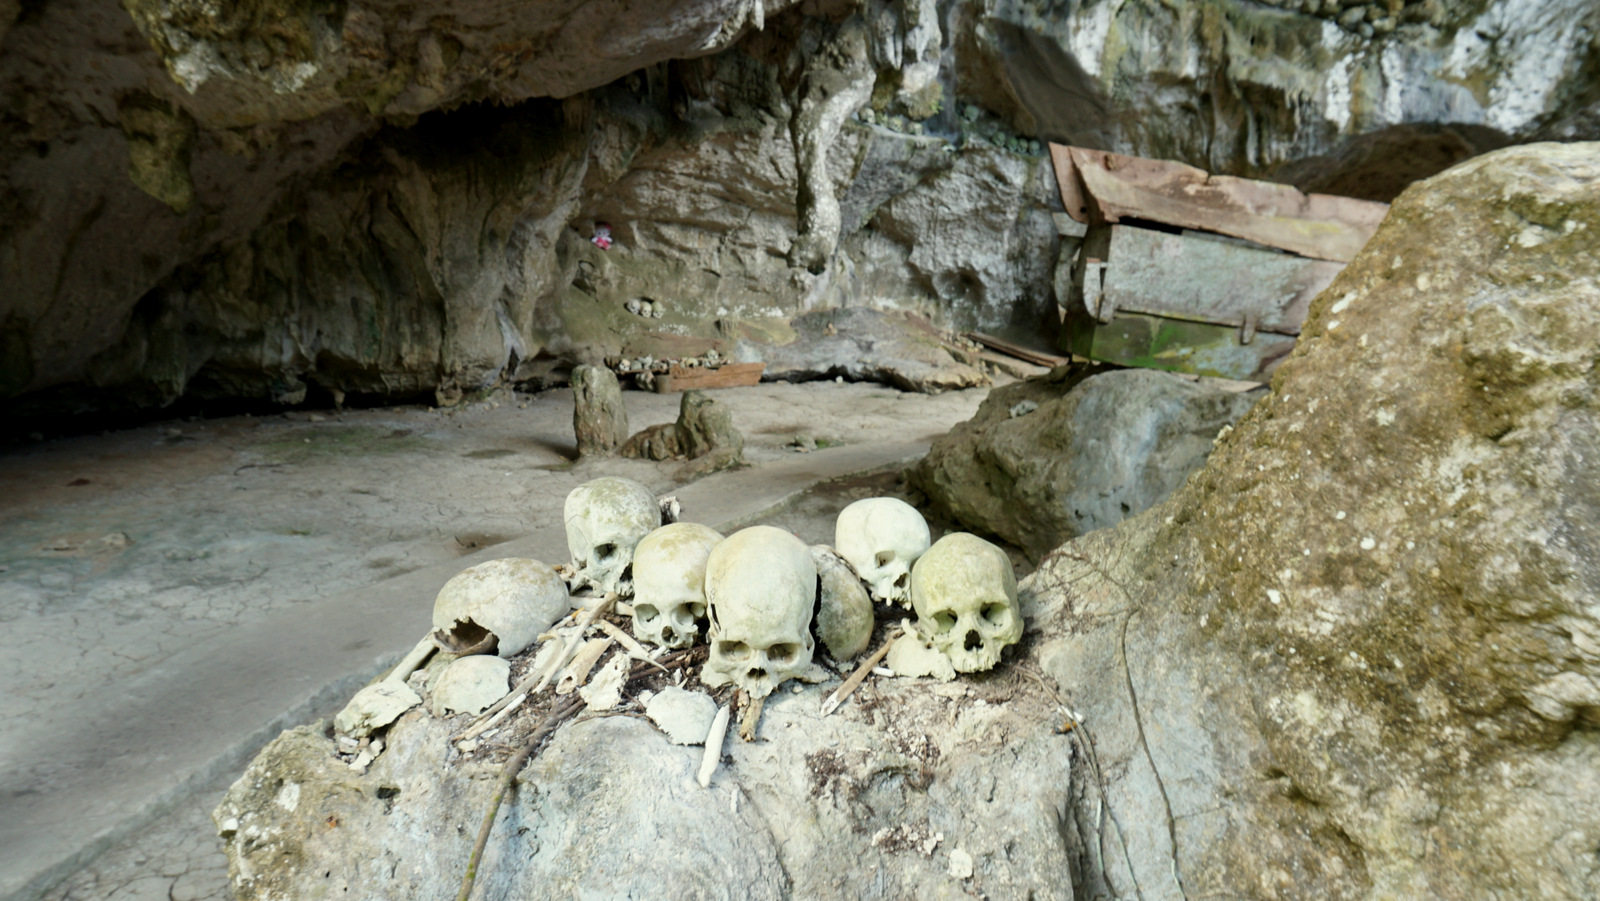 Old remains at graves in a limestone cave in South Toraja. Photo by Upneet Kaur-Nagpal